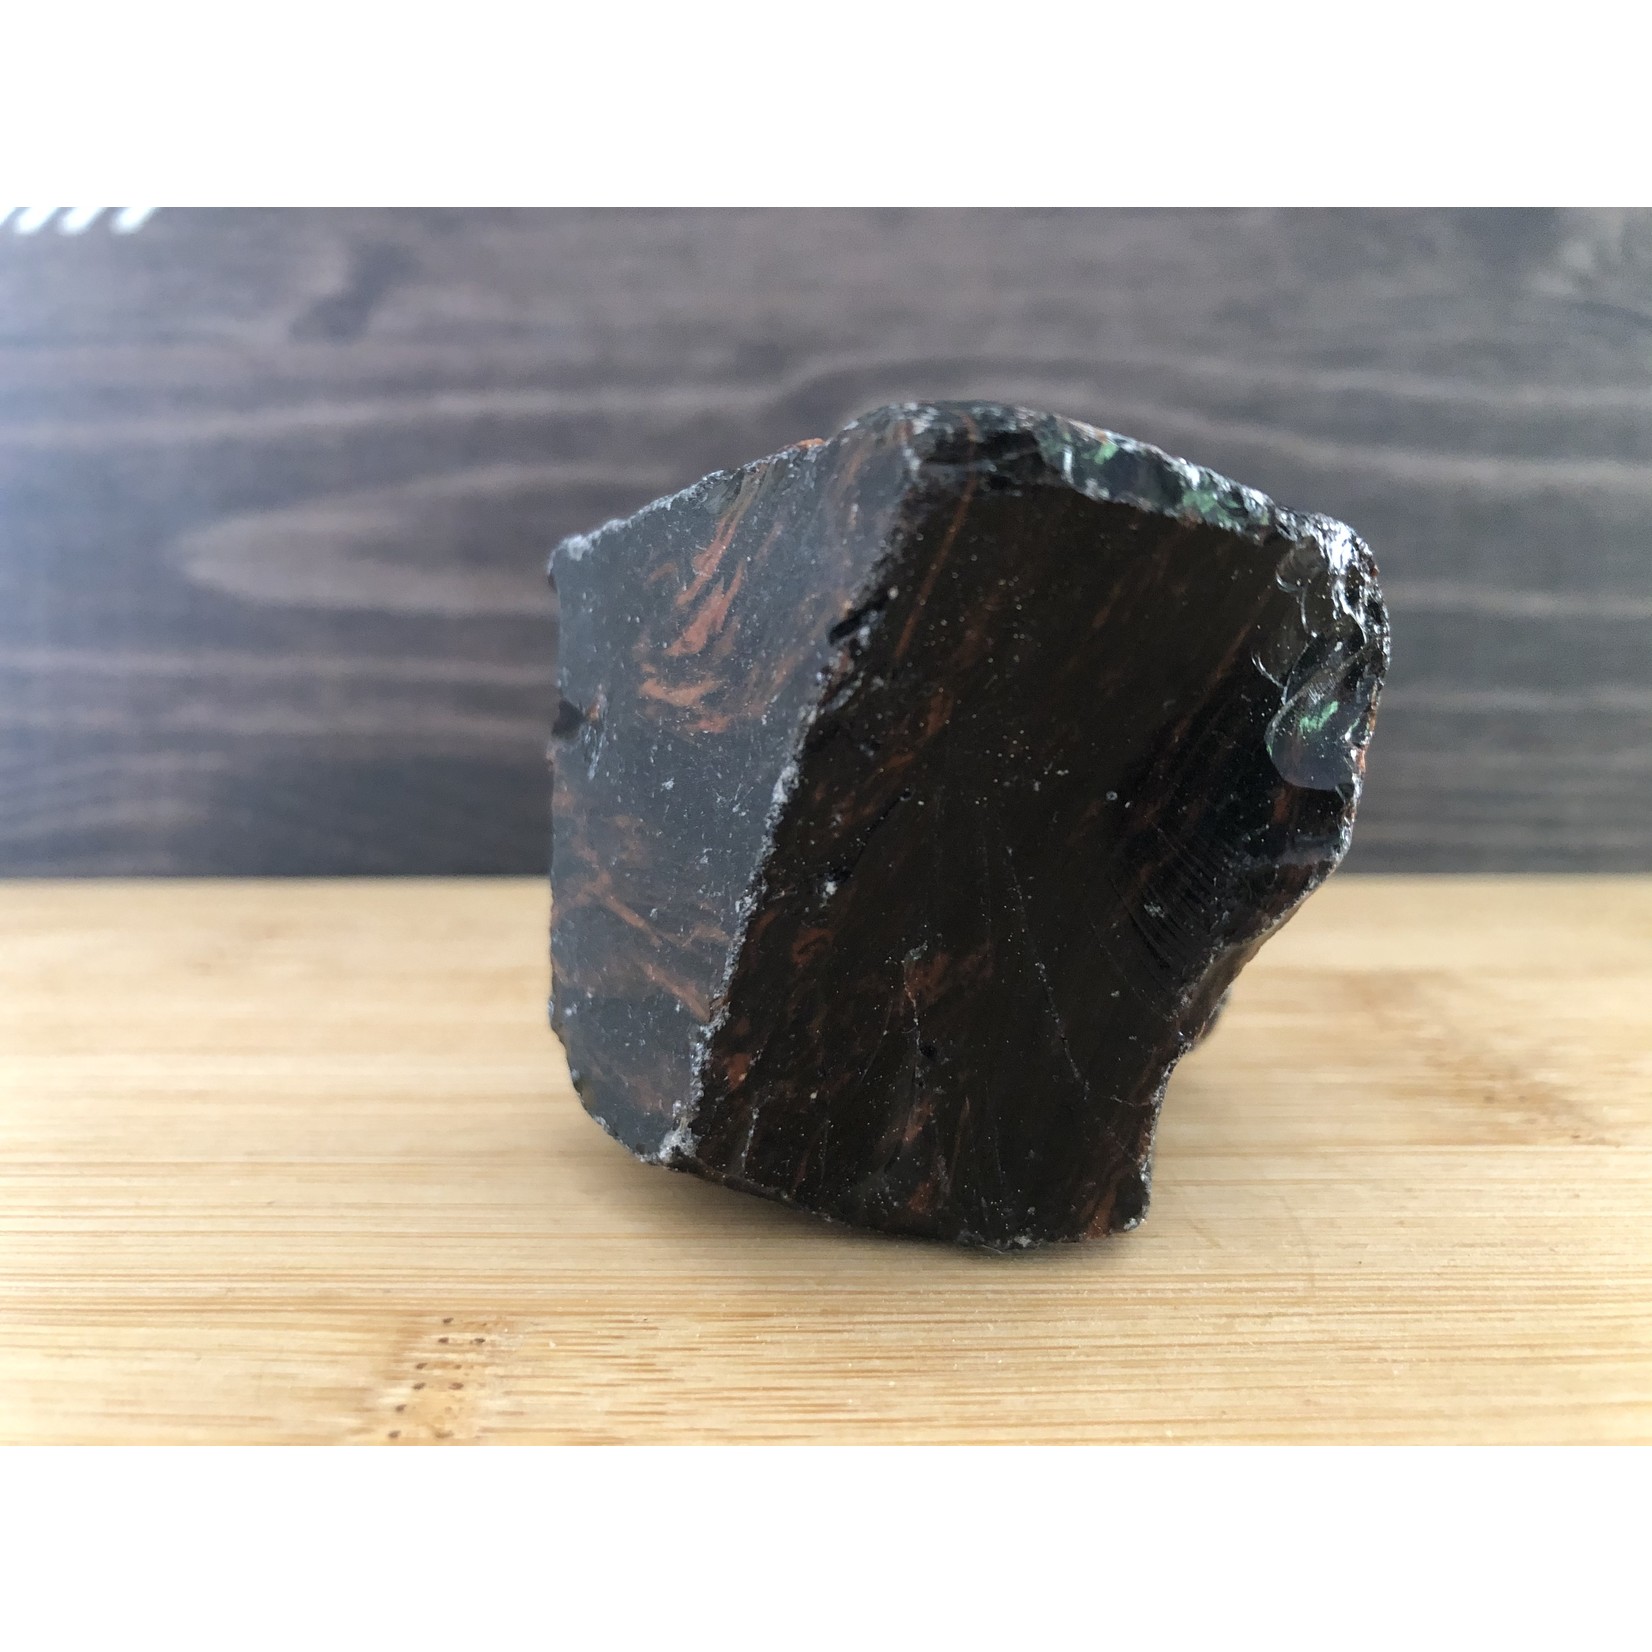 beautiful mahogany obsidian polished, used to relieve various types of pain such as muscle aches or cramps